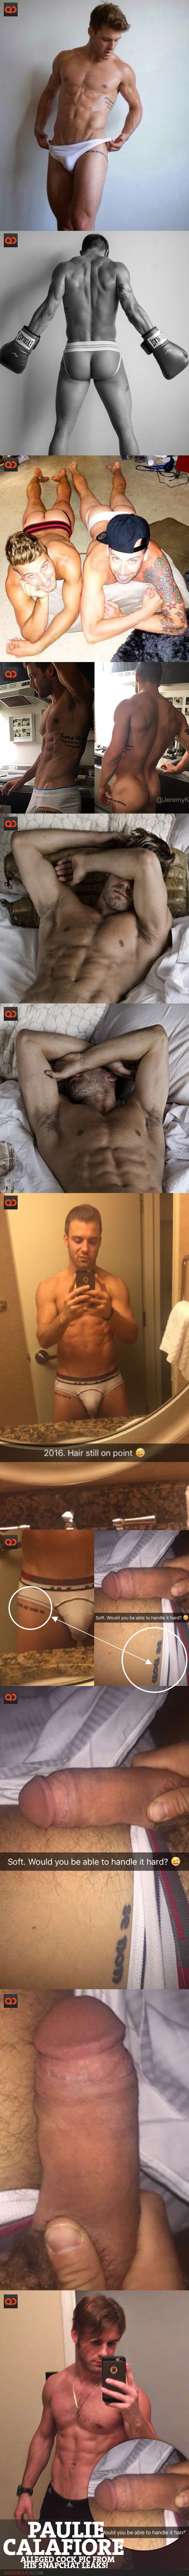 qc-paulie_calafiore_alleged_cock_pic_snapchat_leaks-collage02